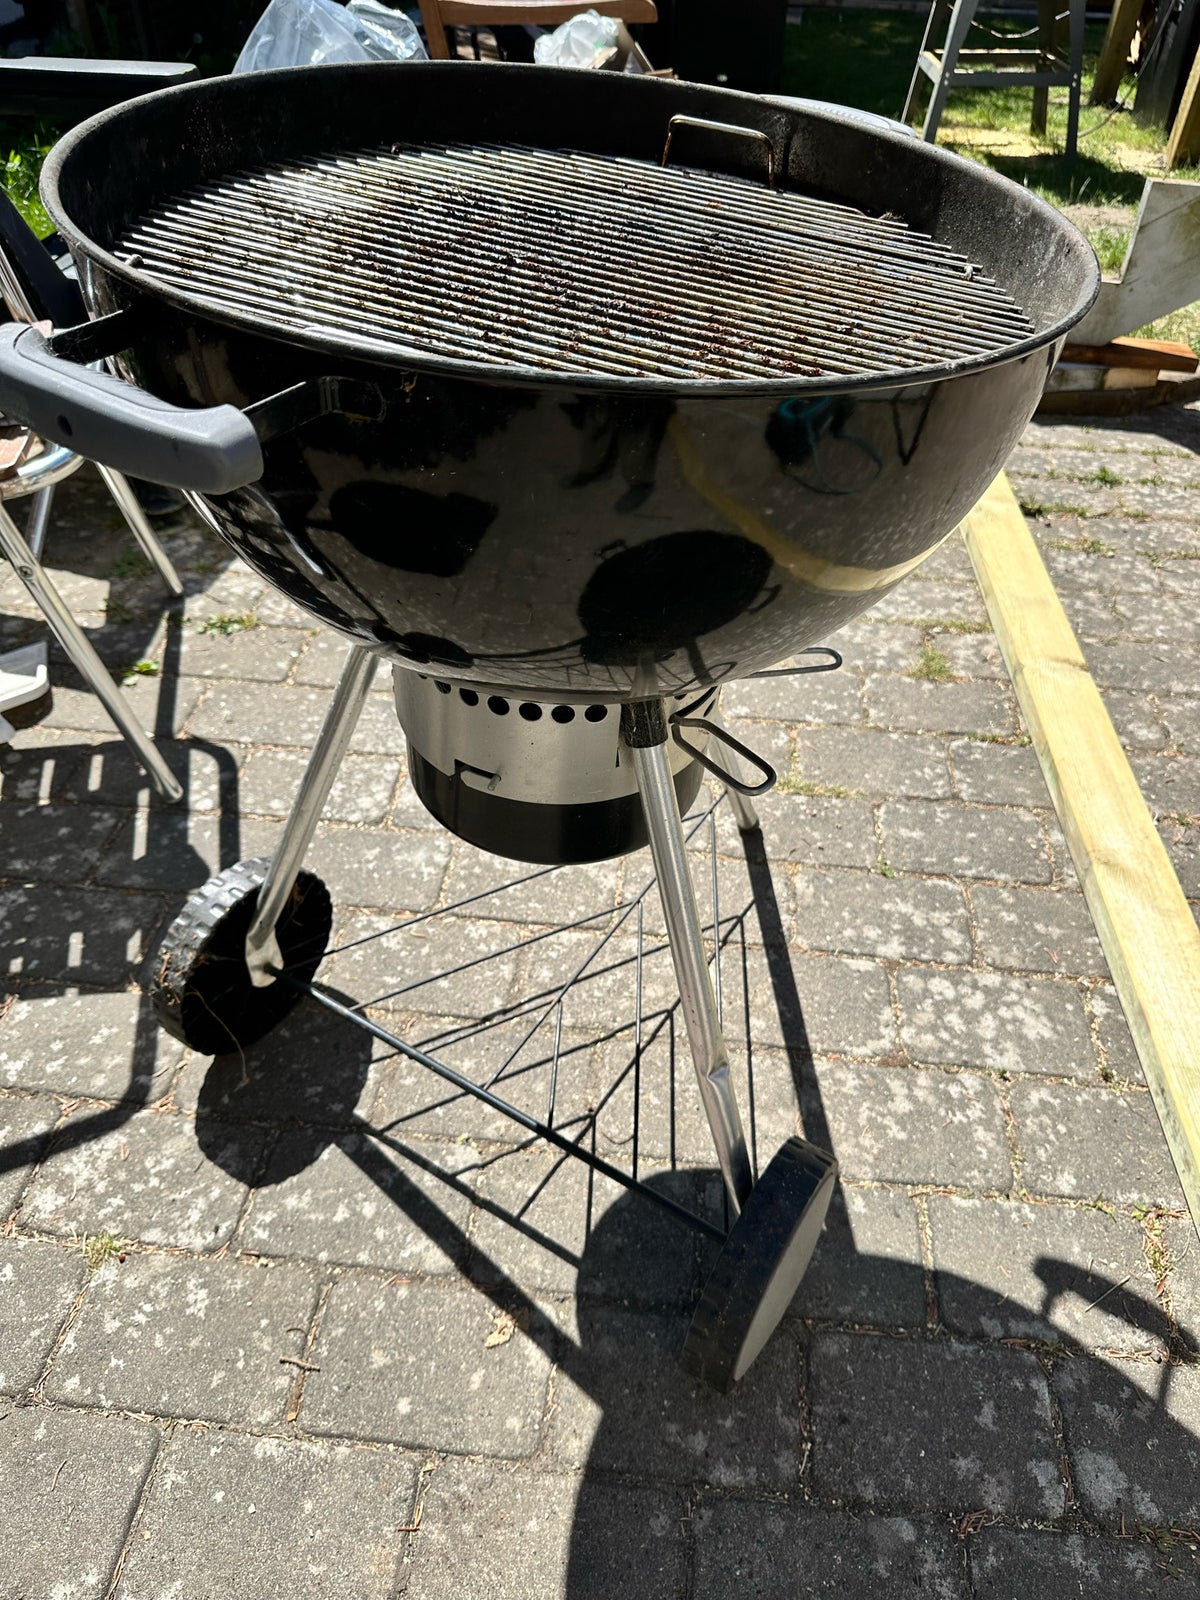 Anden grill, Weber